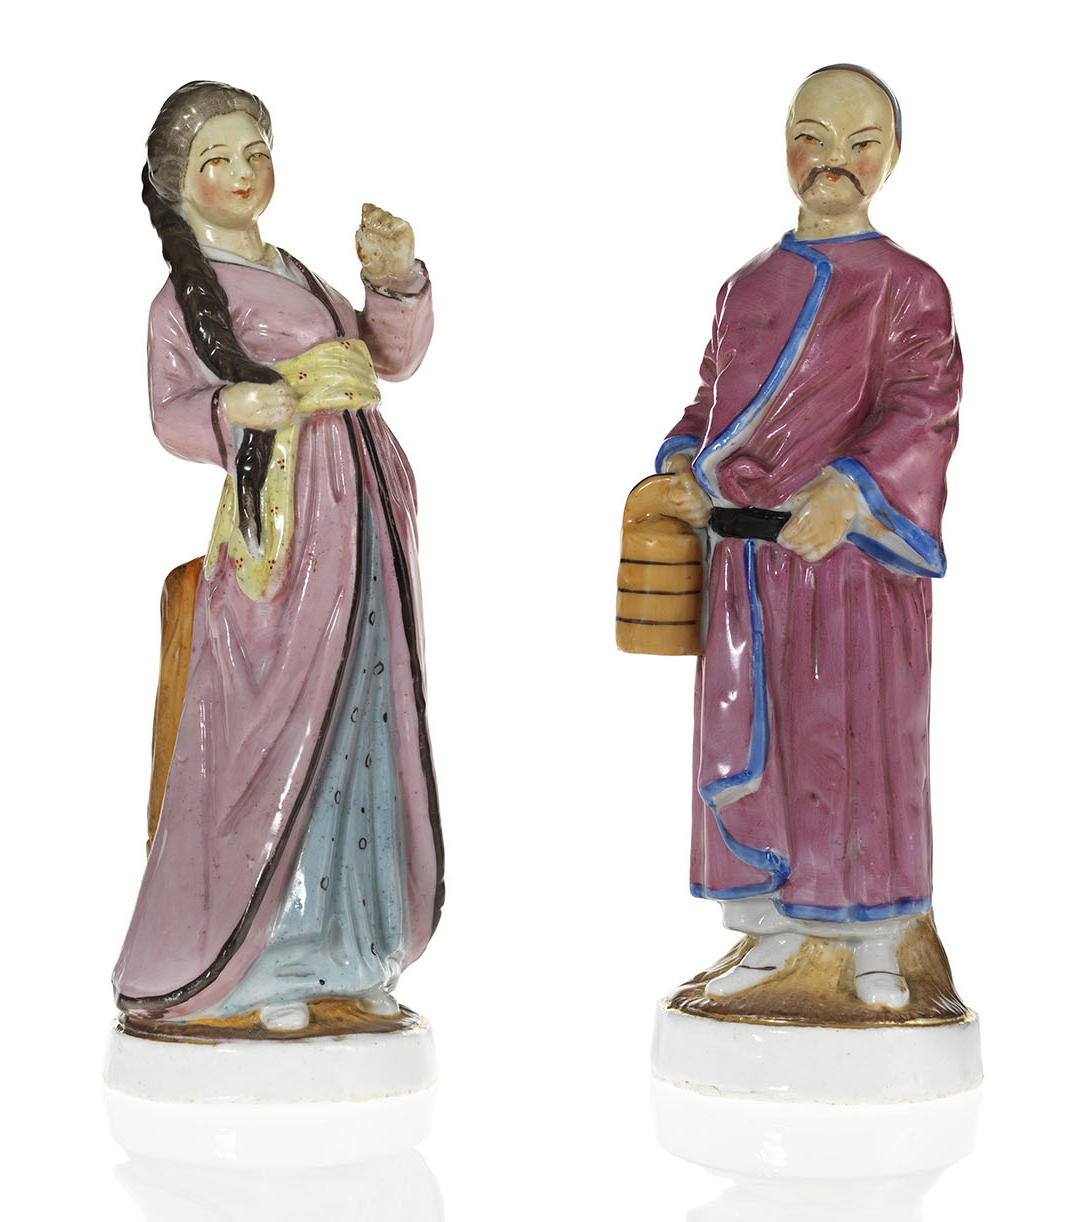 Two Porcelain Figurines of People from the East